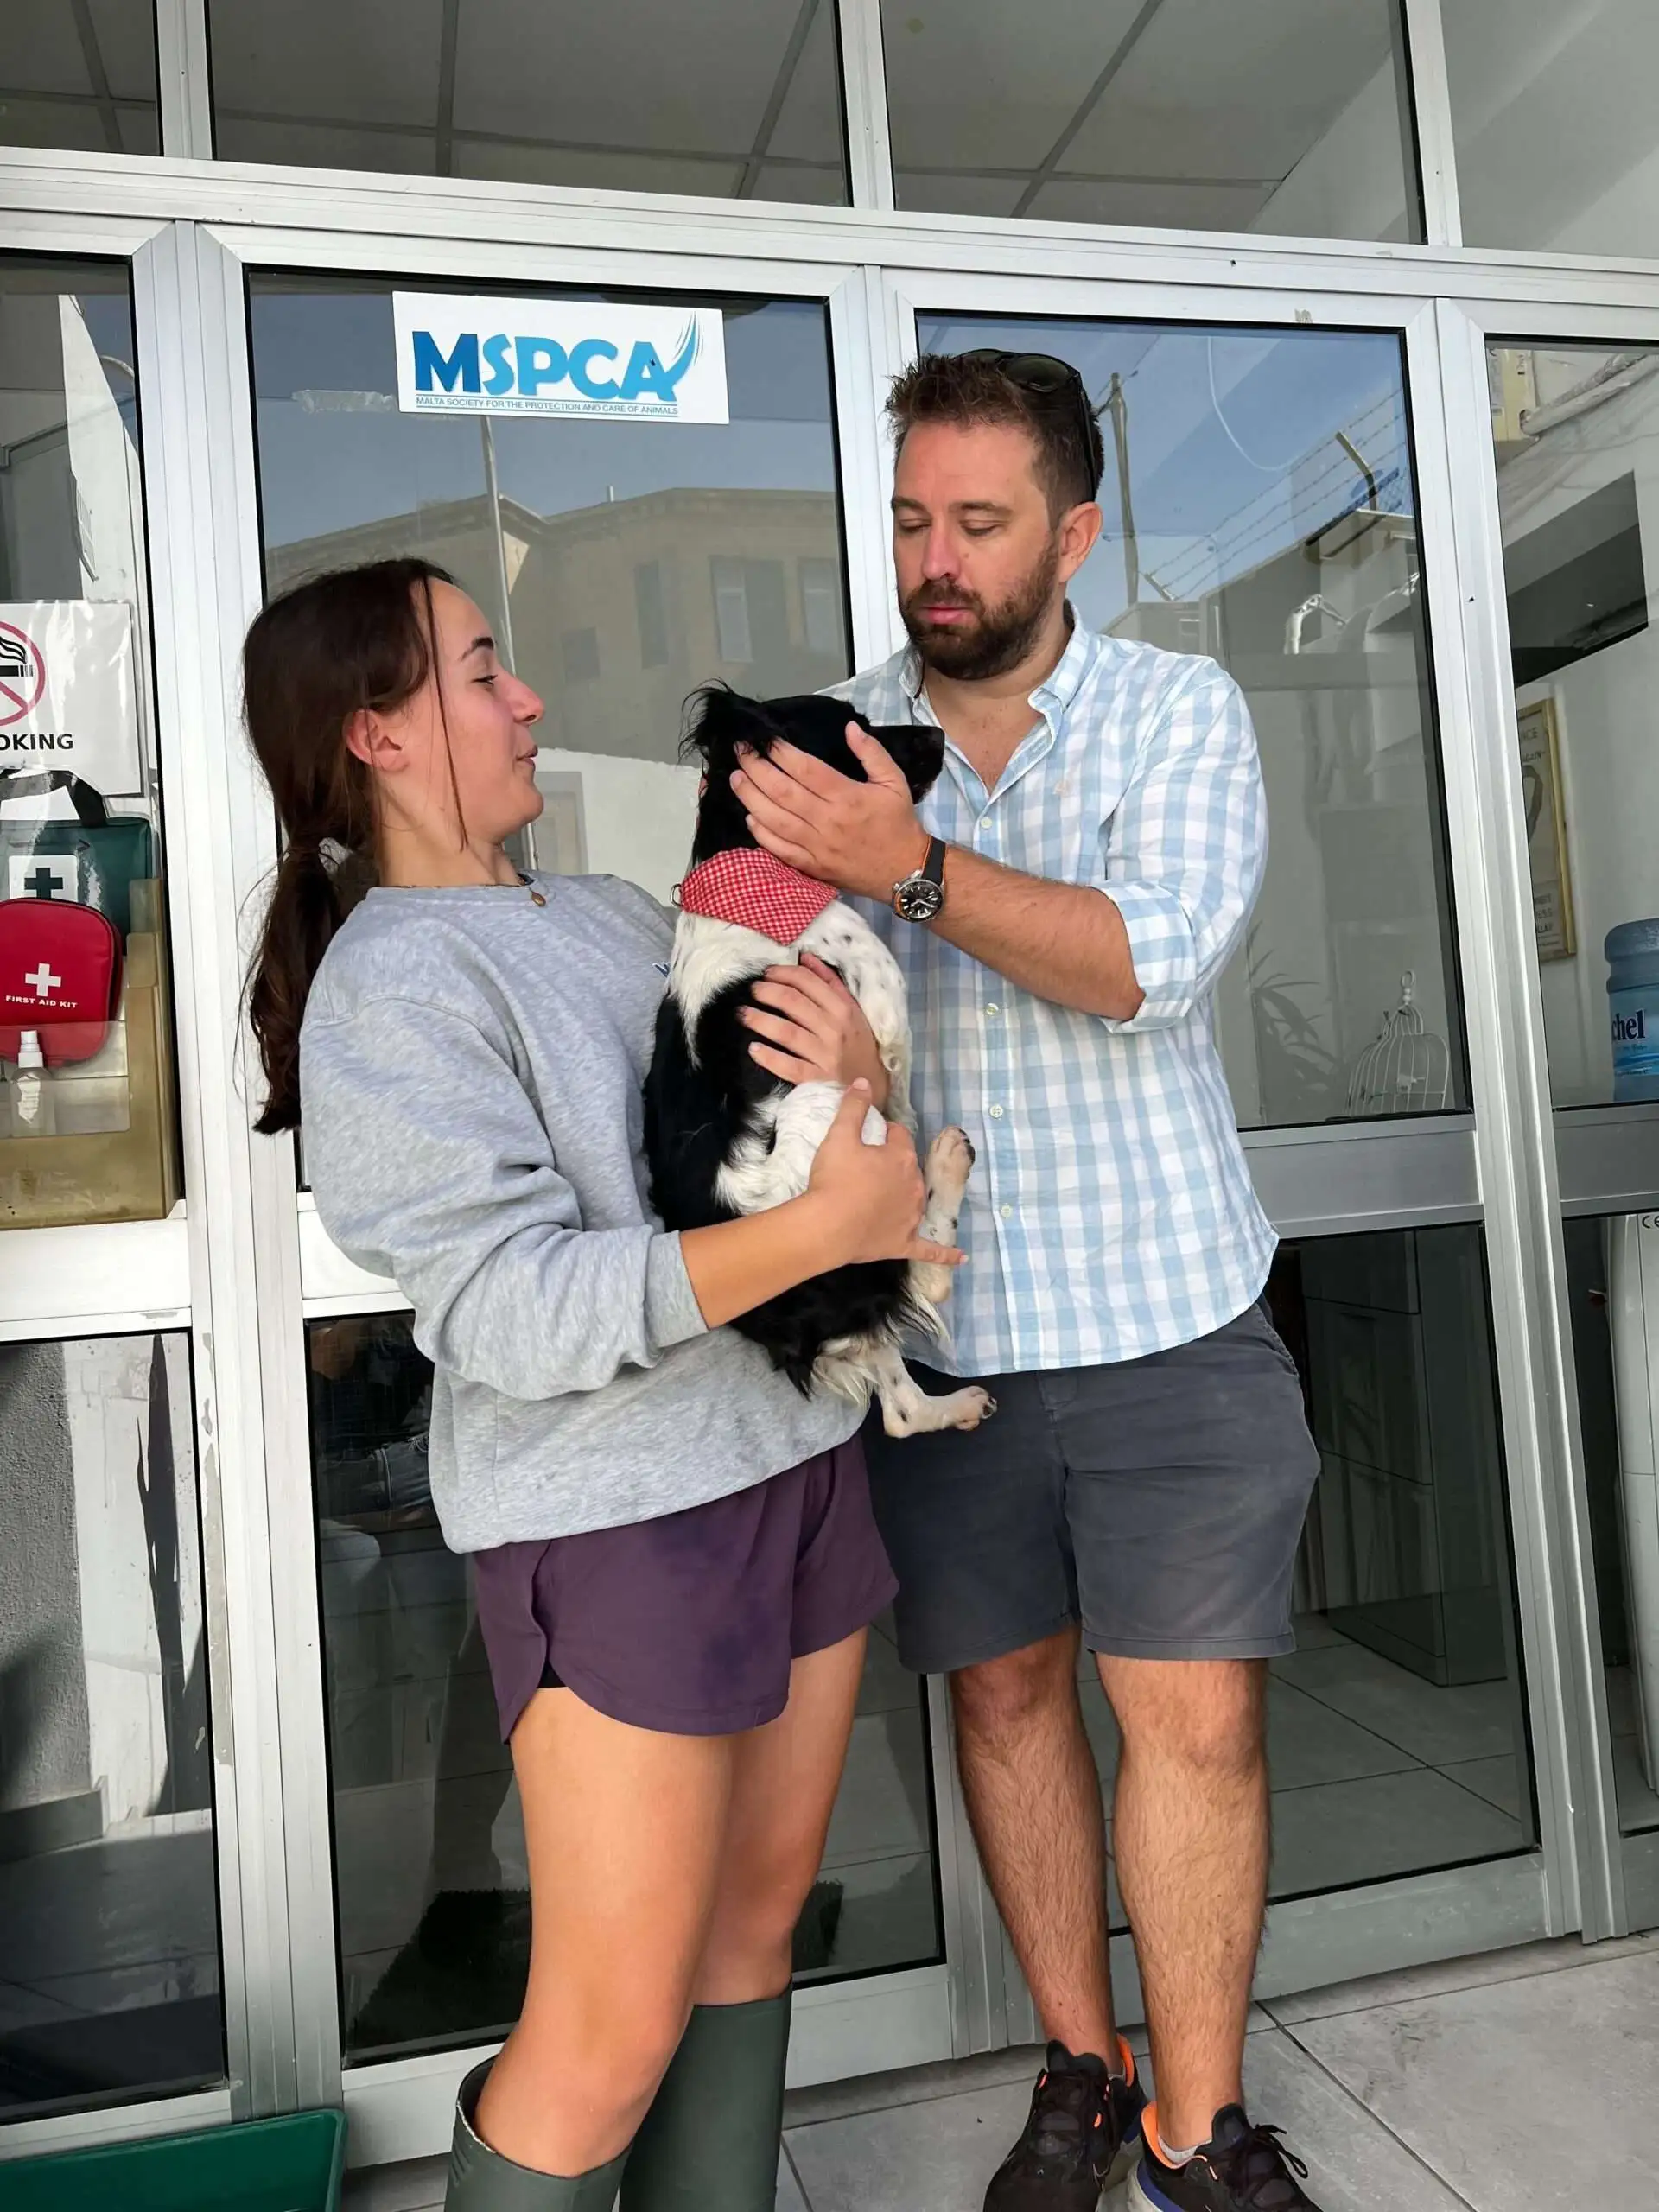 White Label Casinos CEO, Phil Pearson, visits the MSPCA animal shelter in Malta and holds a dog.